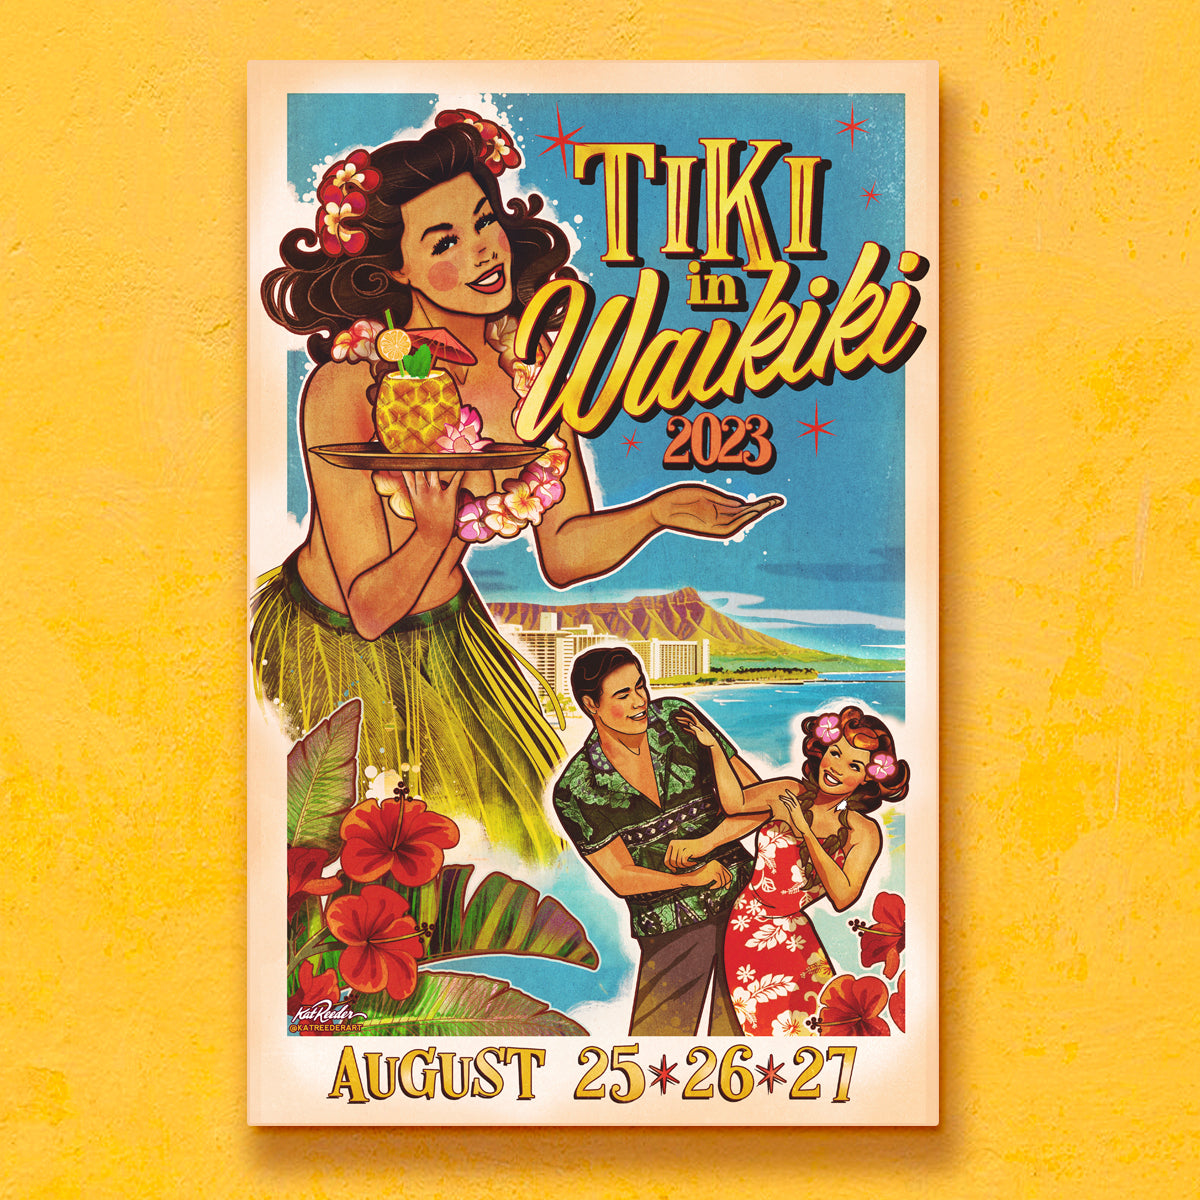 LIMITED EDITION Tiki in Waikiki '23 Signed Poster